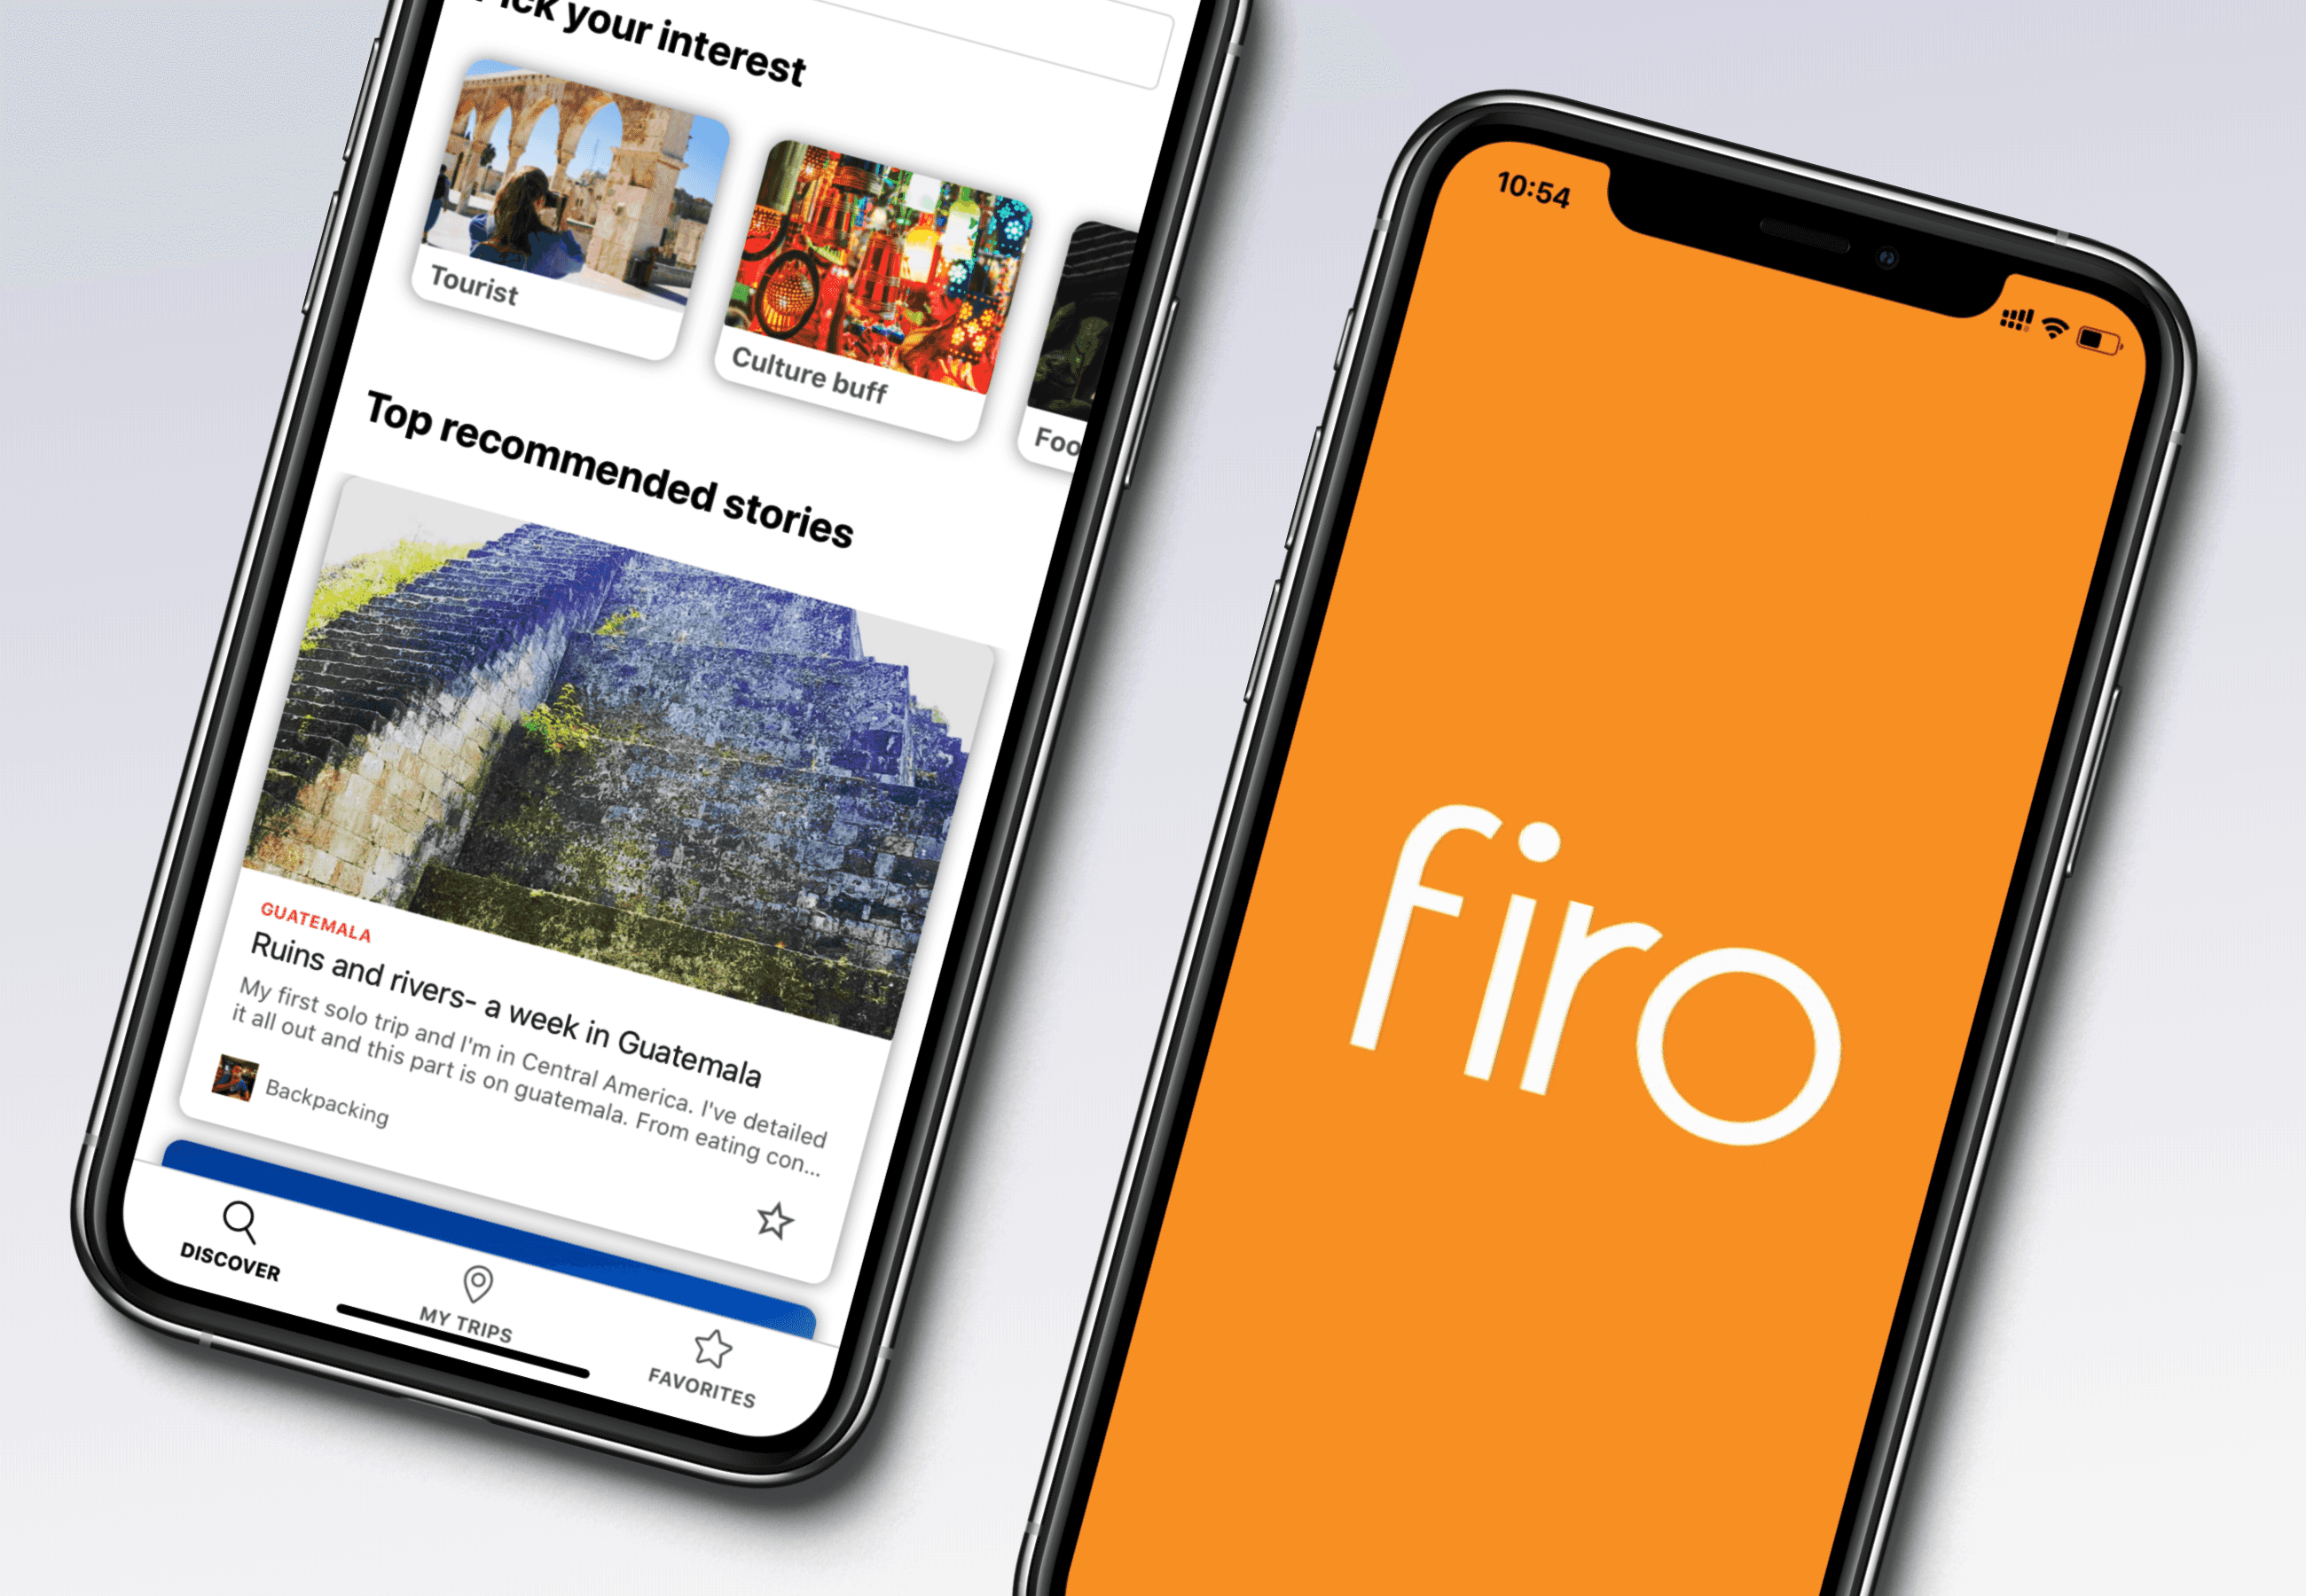 Firo provides an easy way to create your travel itinerary and collaborate with your travel buddies? Firo makes it simple to get ideas, create city day plans and collaborate for your next trip.